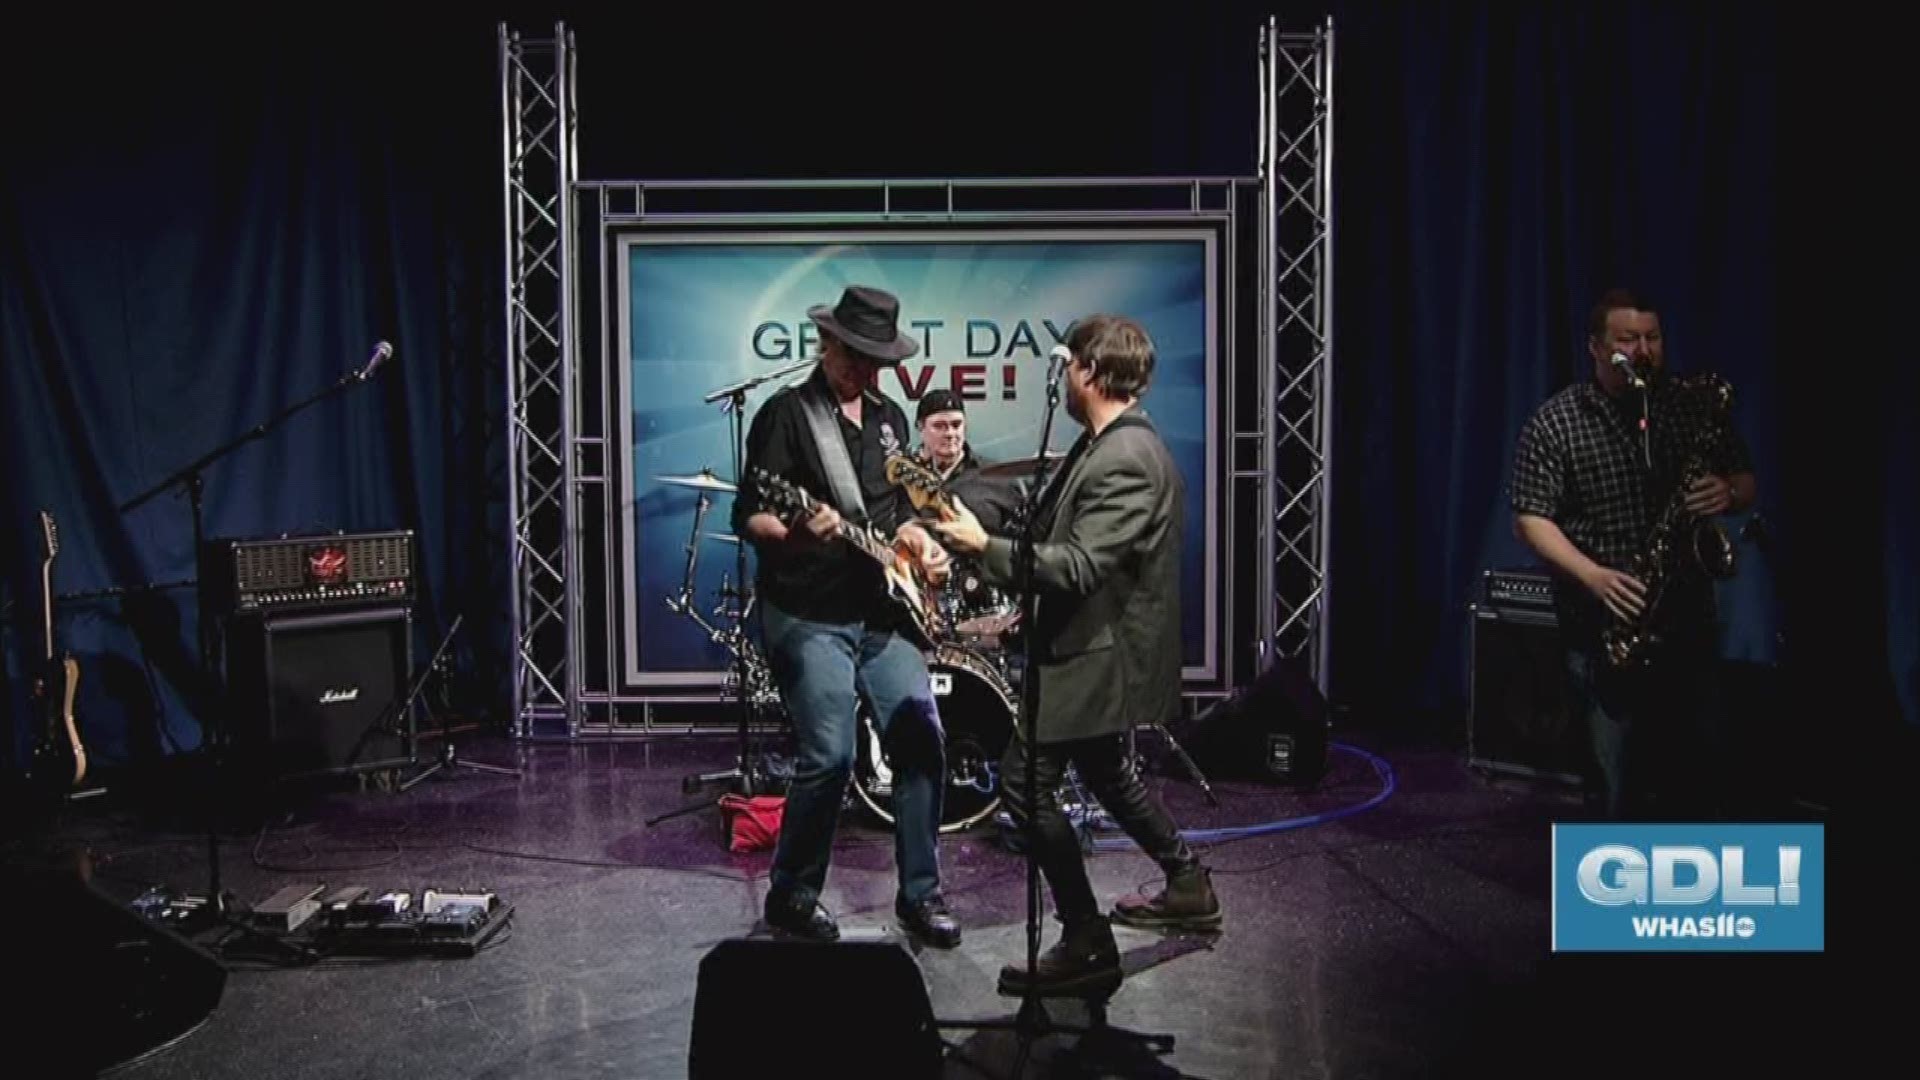 The Gypsy Stone Kings stopped by Great Day Live to perform a couple songs and talk about their benefit show for Gavin Caster.